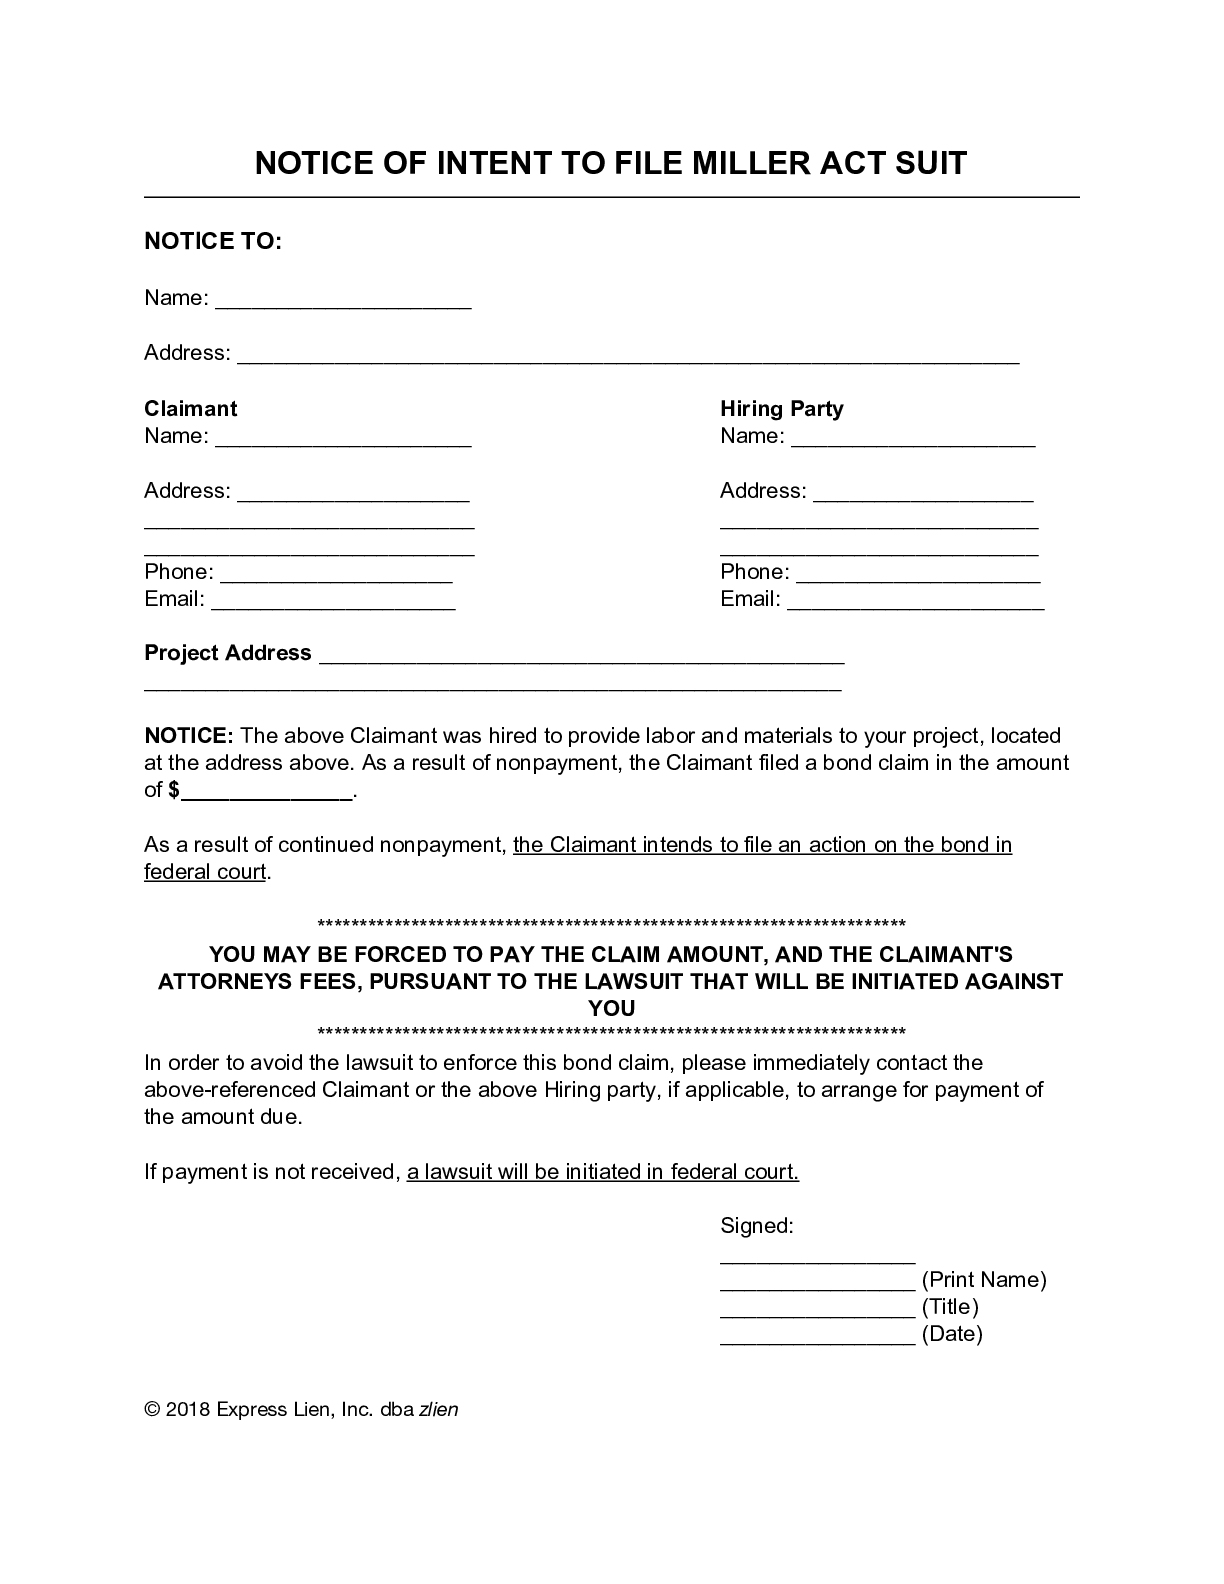 Notice of Intent to File Miller Act Suit Form